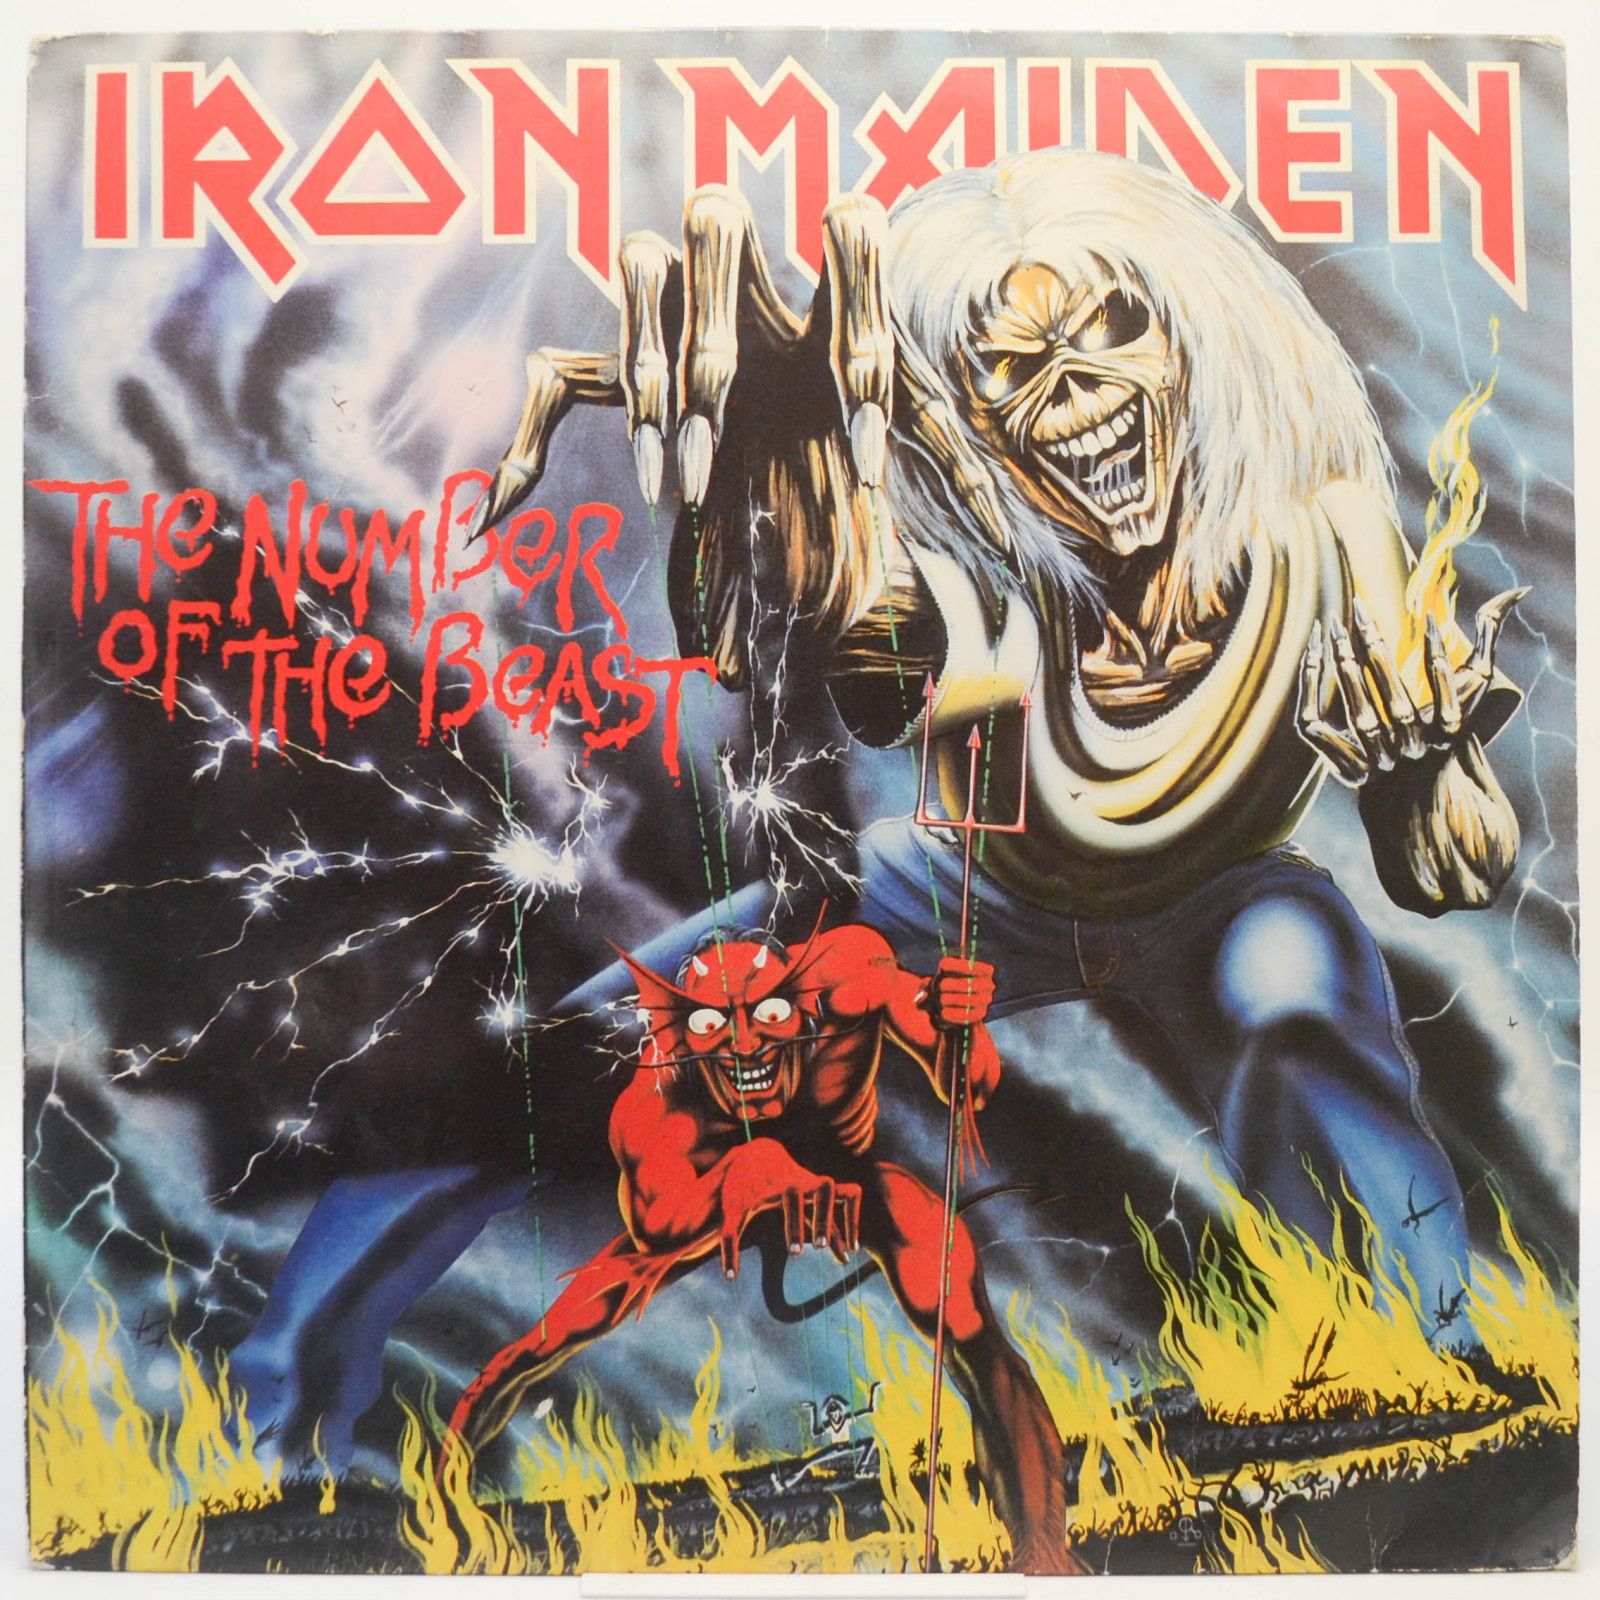 Iron Maiden — The Number Of The Beast, 1982